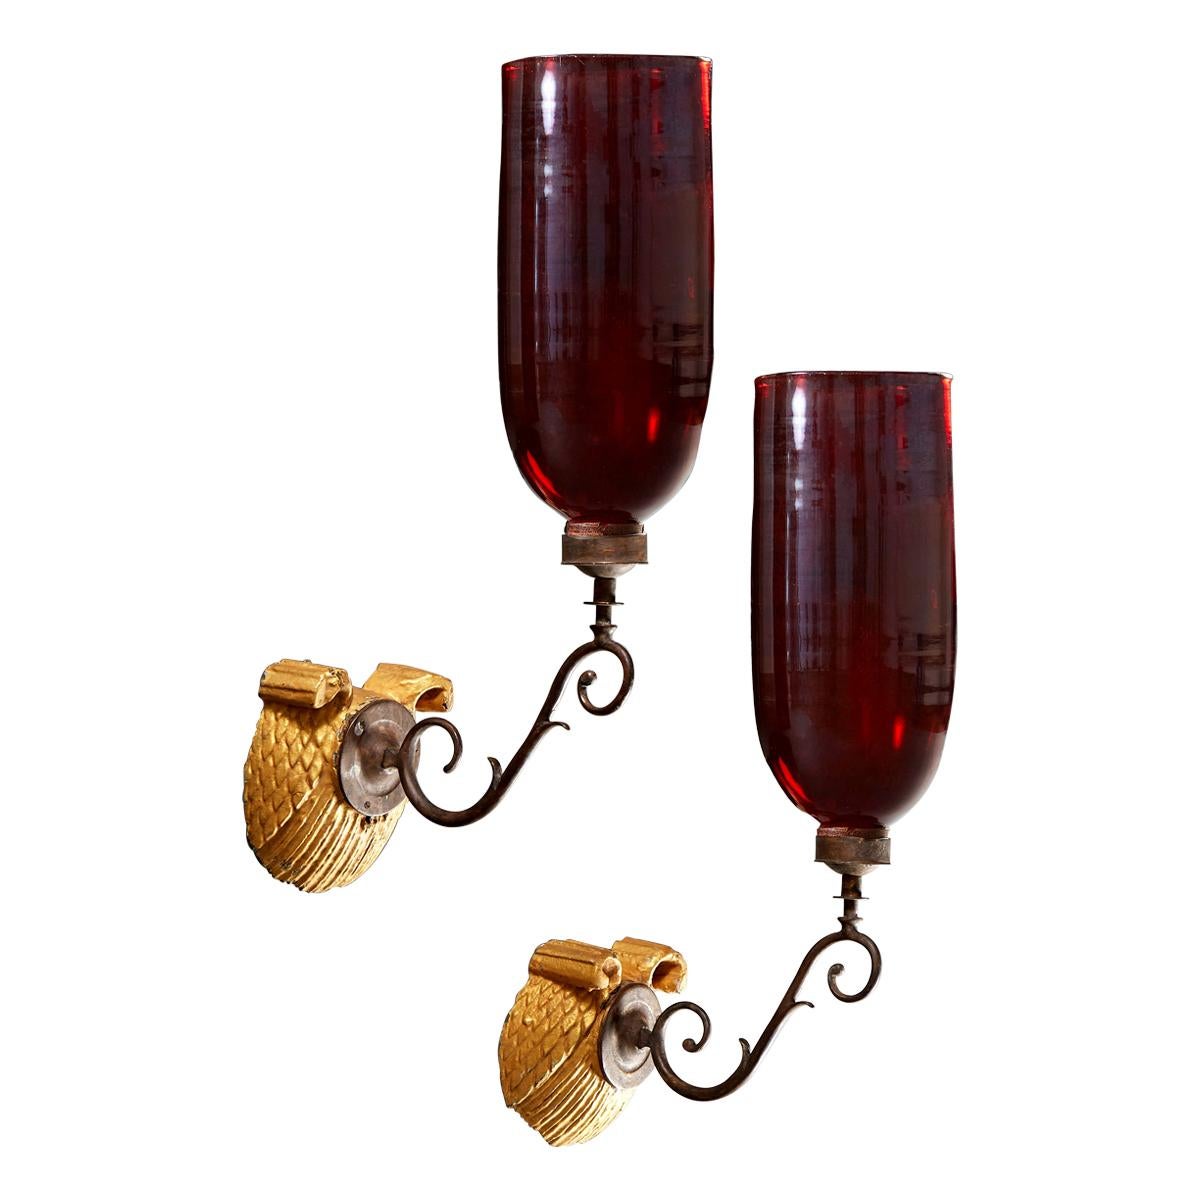 Pair of Mid-19th Century Wall Sconces with Red Glass Hurricane Shades